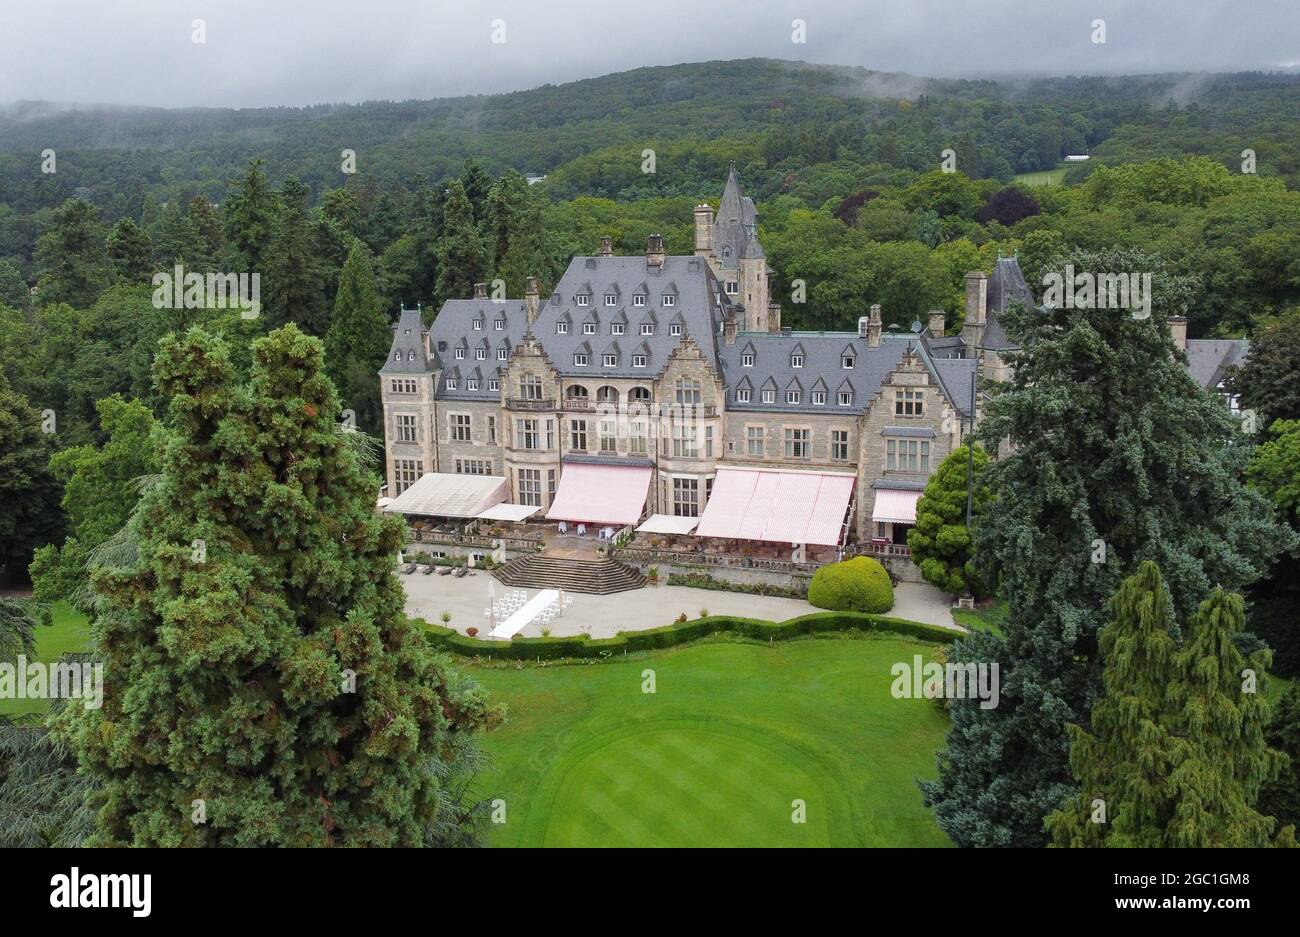 06 August 2021, Hessen, Kronberg: Surrounded by the park with golf course  and trees is the 5-star-superior Schlosshotel Kronberg (shot with drone).  Despite the Corona restrictions, a dozen feature films have been